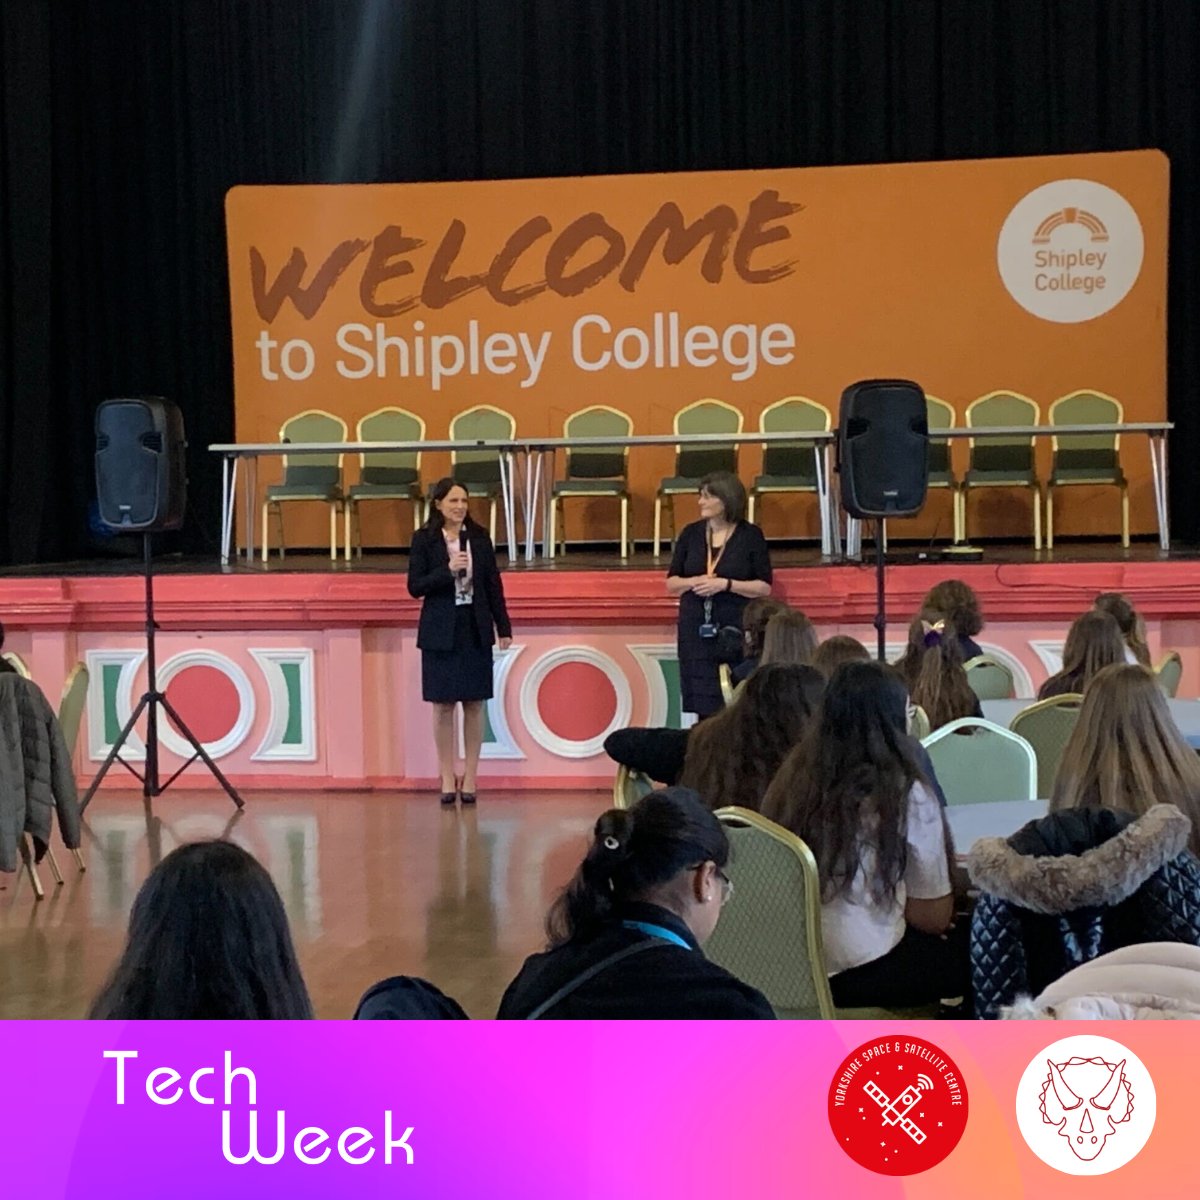 Women are changing the world and our goal is to help girls become the future leaders of #STEM! We are at @Shipley_College with 50 students attending our #TechforGood event and 9 speakers all STEM experts.

#Tech #TechWeek #BradfordSkillsMonth #STEMeducation #GetintoSTEM